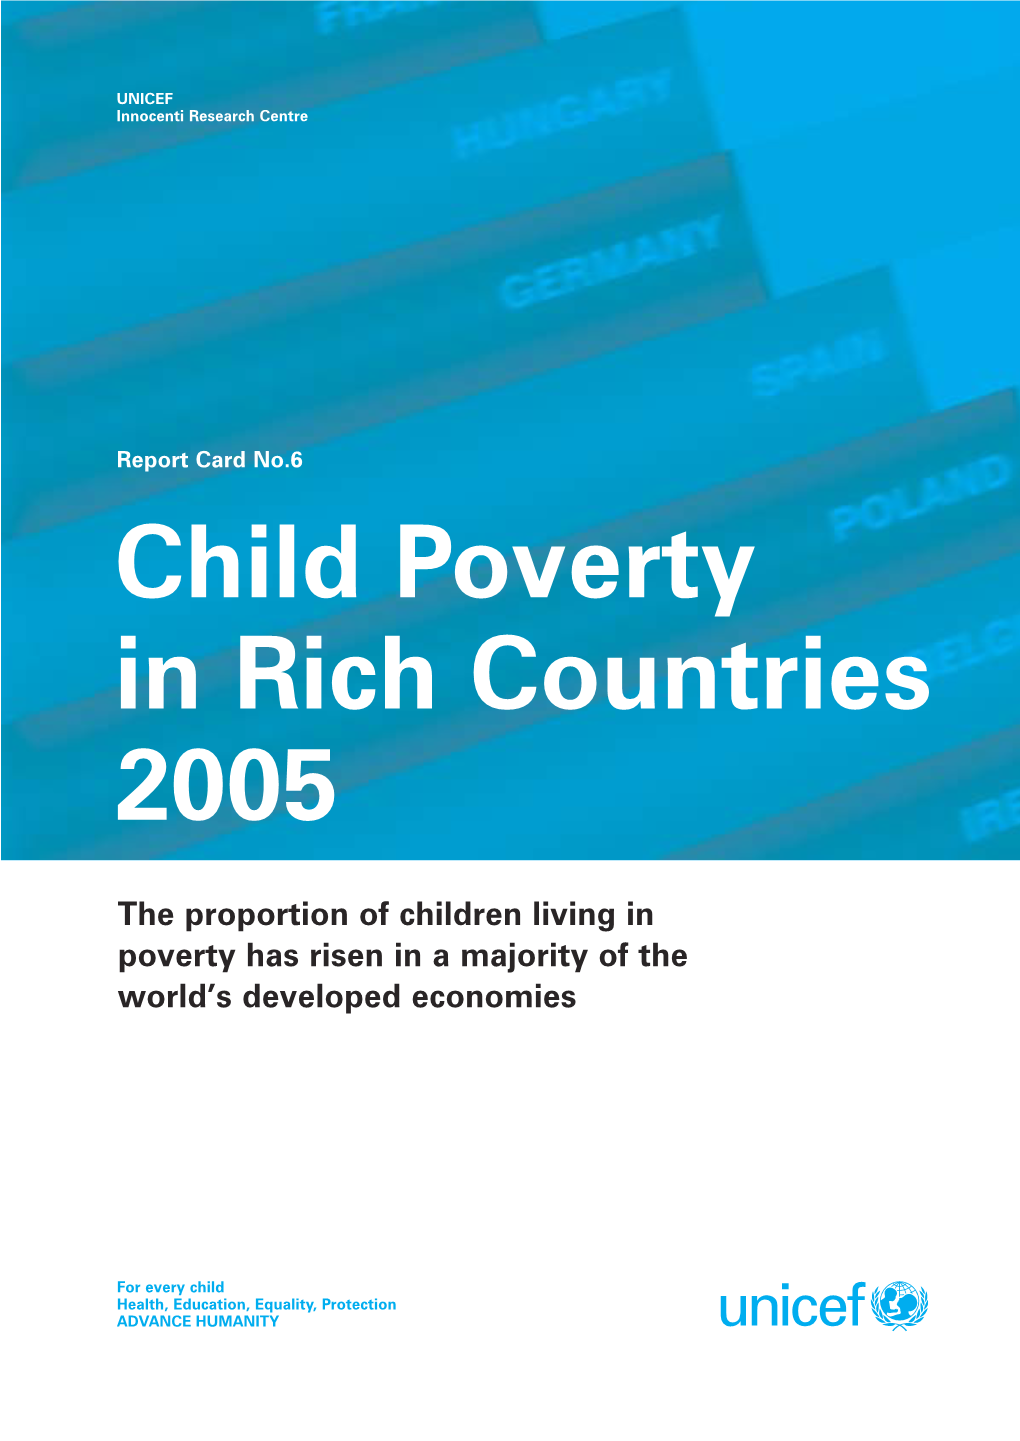 Child Poverty in Rich Countries 2005